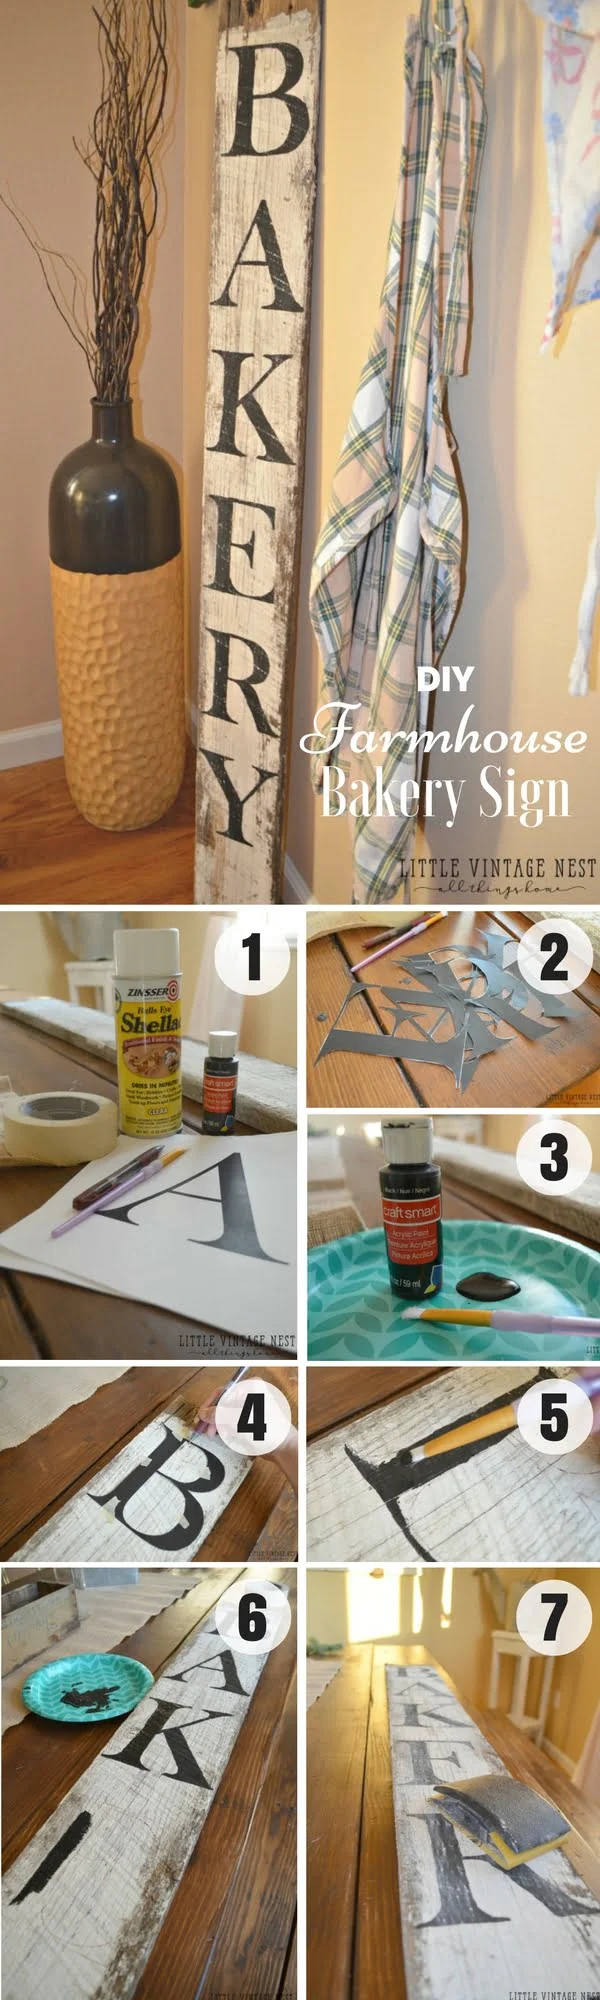 17 Fab DIY Farmhouse Signs You Can Make Yourself - Check out how to make an easy DIY Farmhouse Bakery Sign for kitchen decor